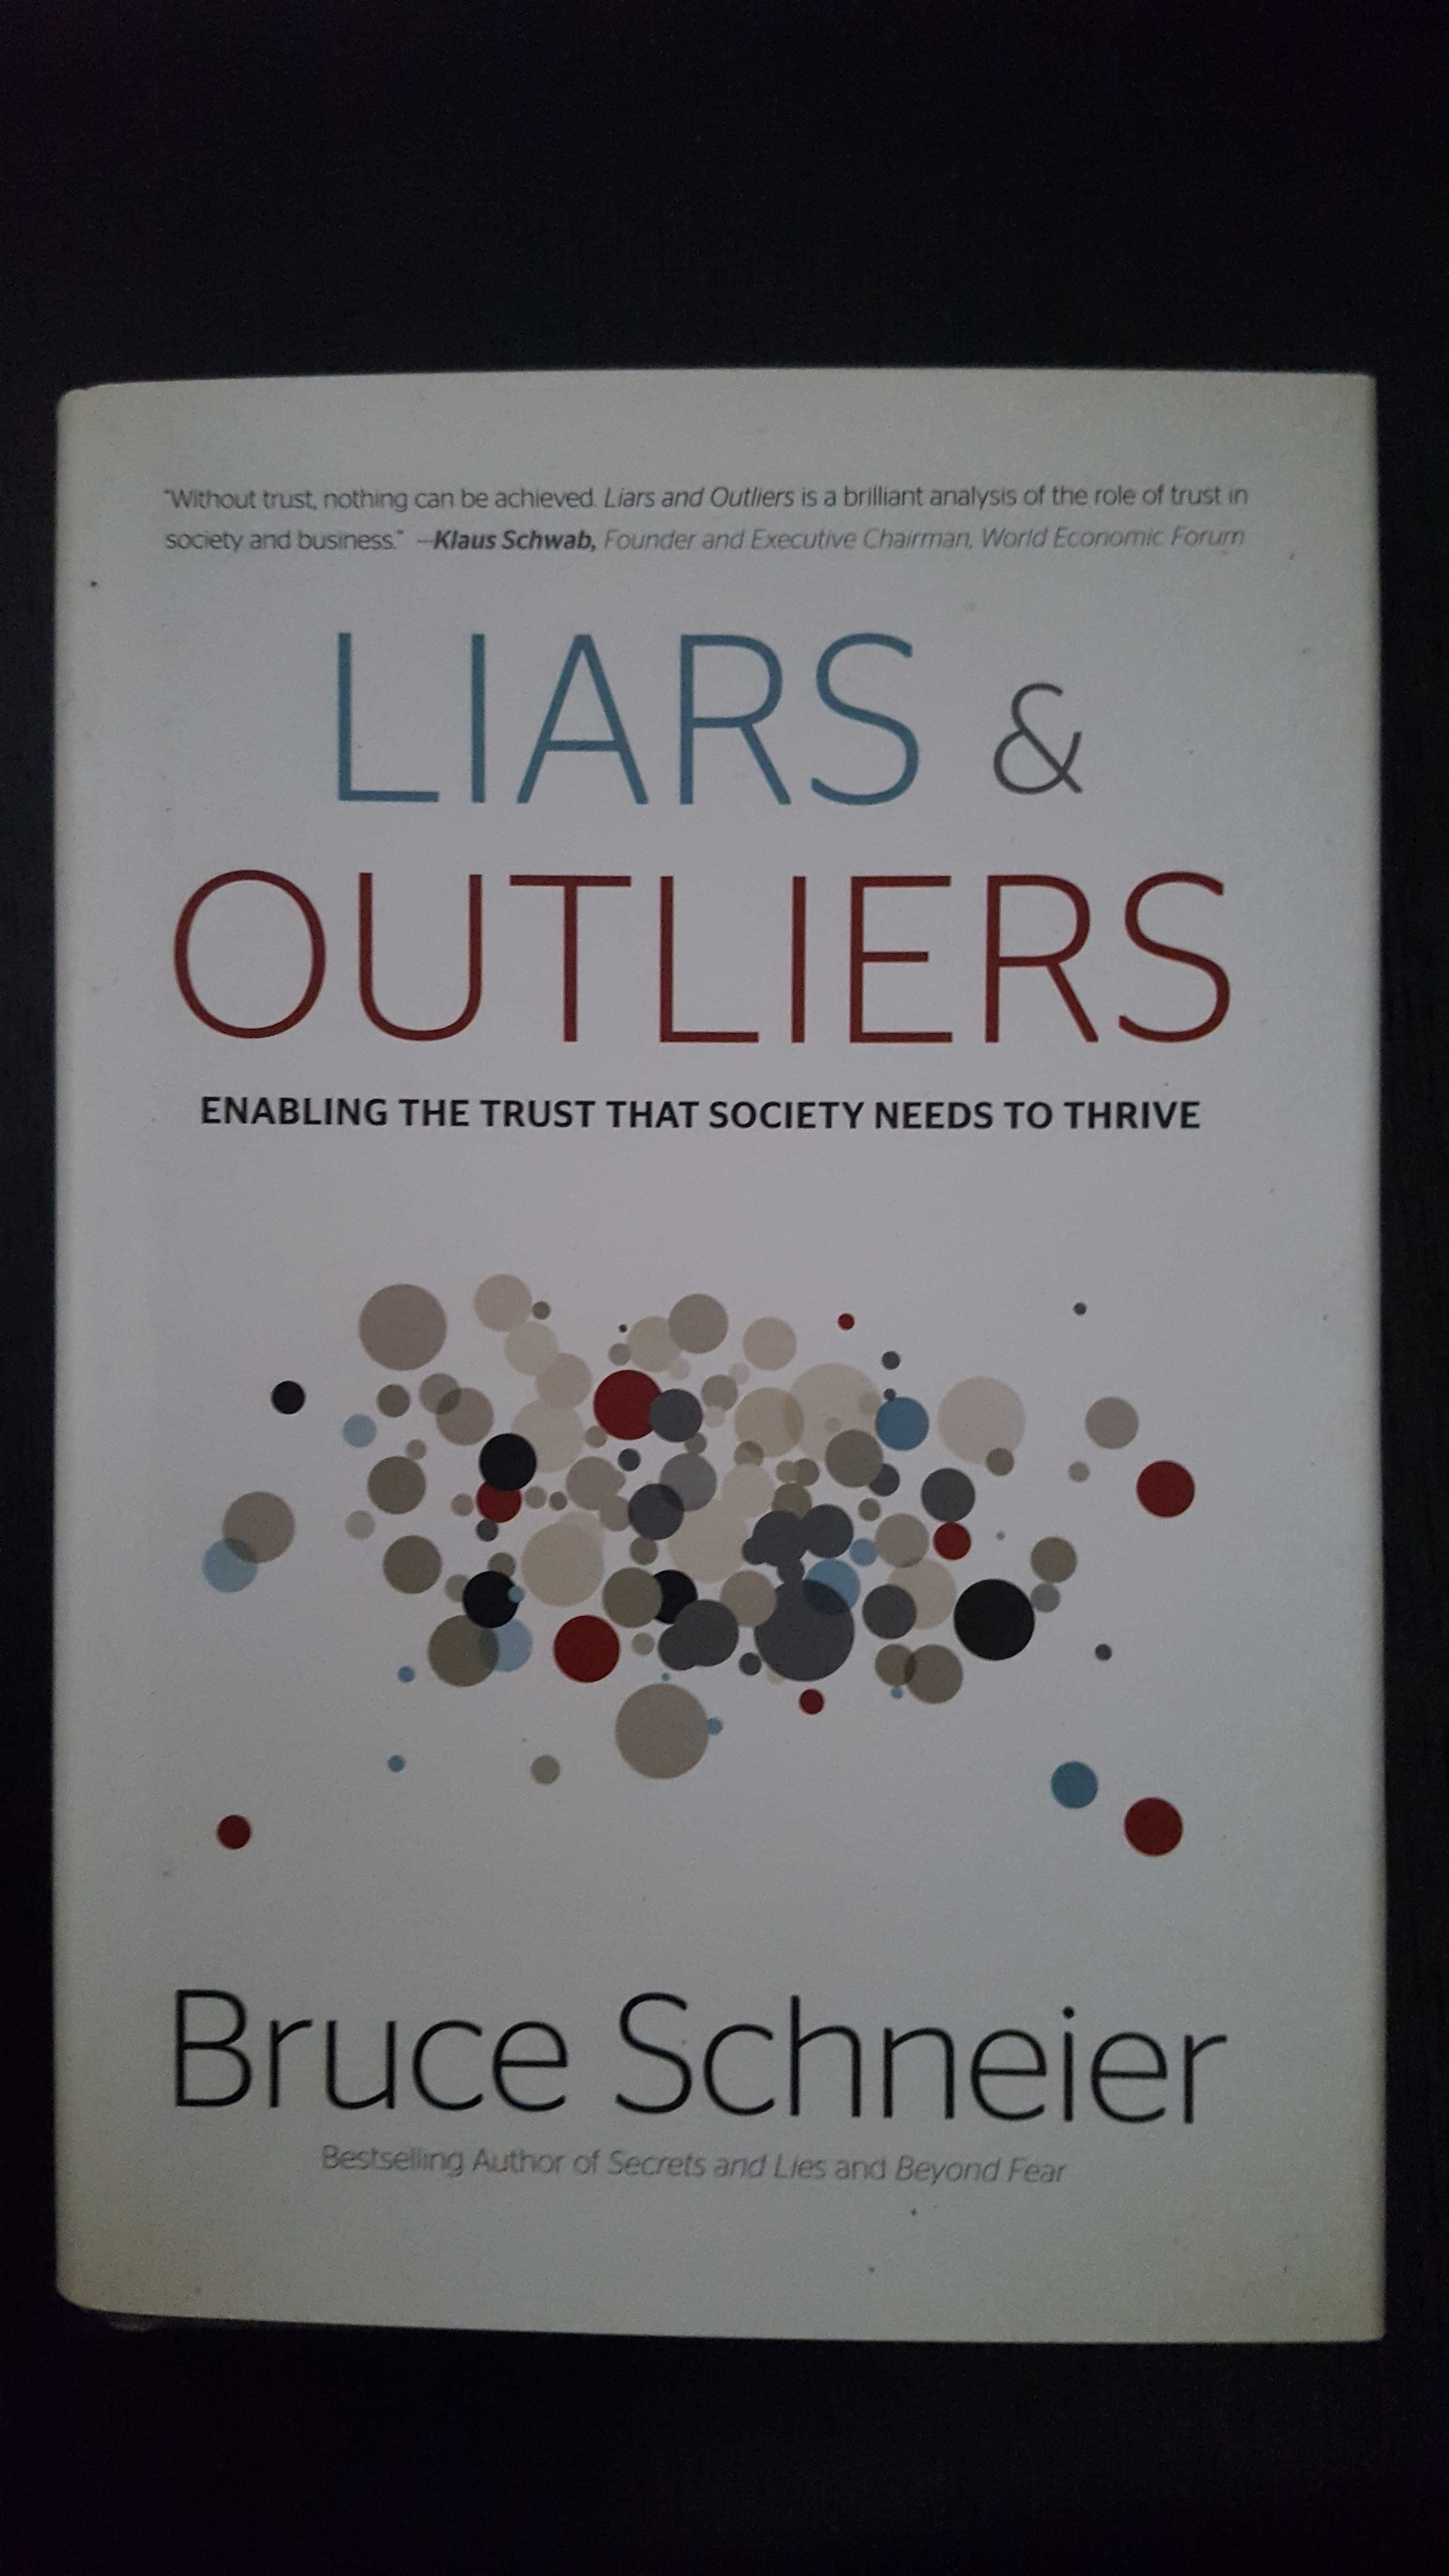 Livro "Liers and Outliers"